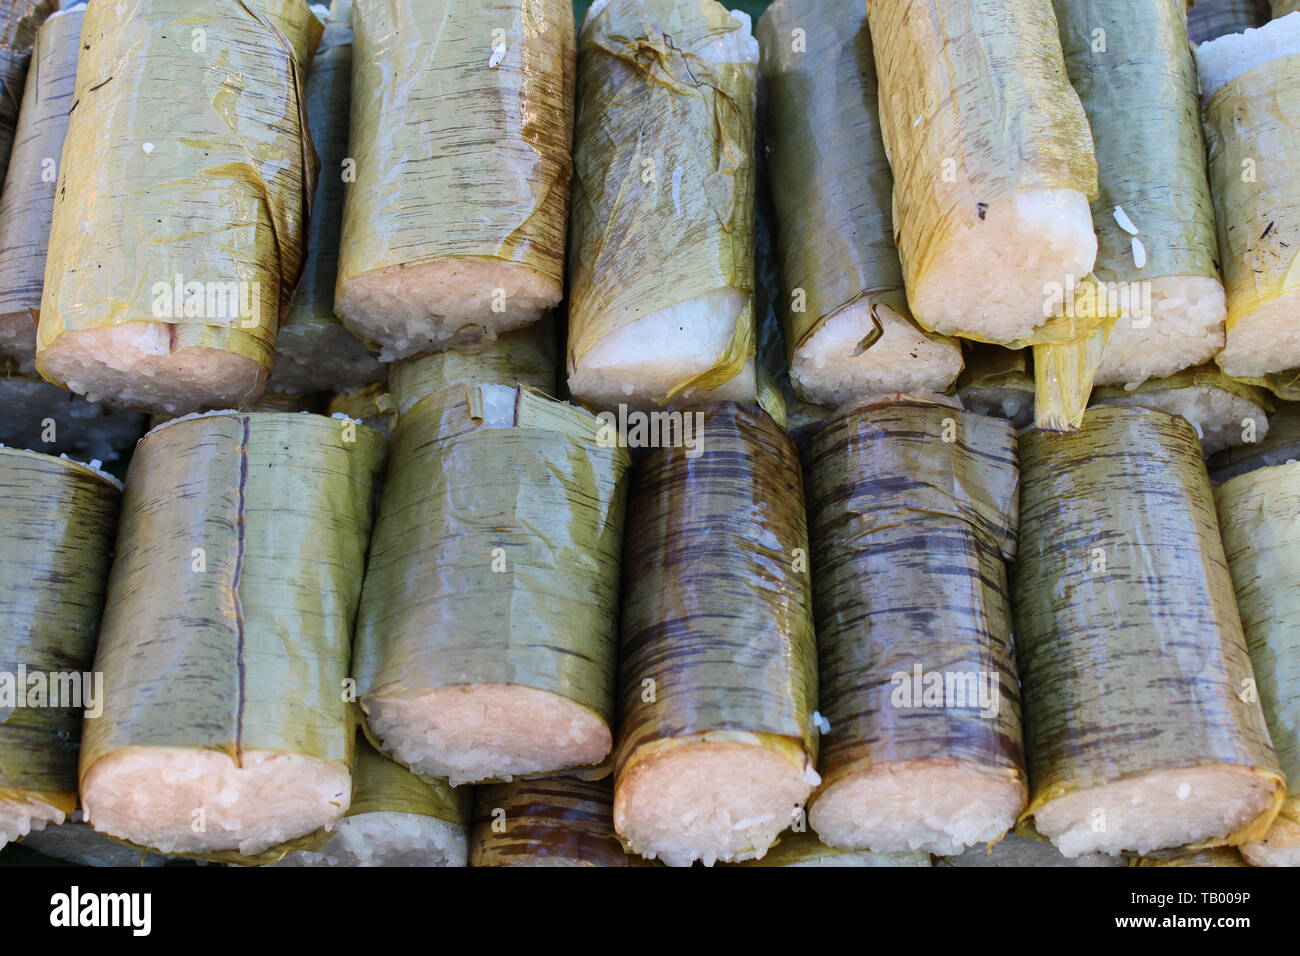 Street food called lemang (rice dumpling) a Malaysian local food and a must delicacy during festive season in Malaysia, Singapore, Indonesia and Brune Stock Photo